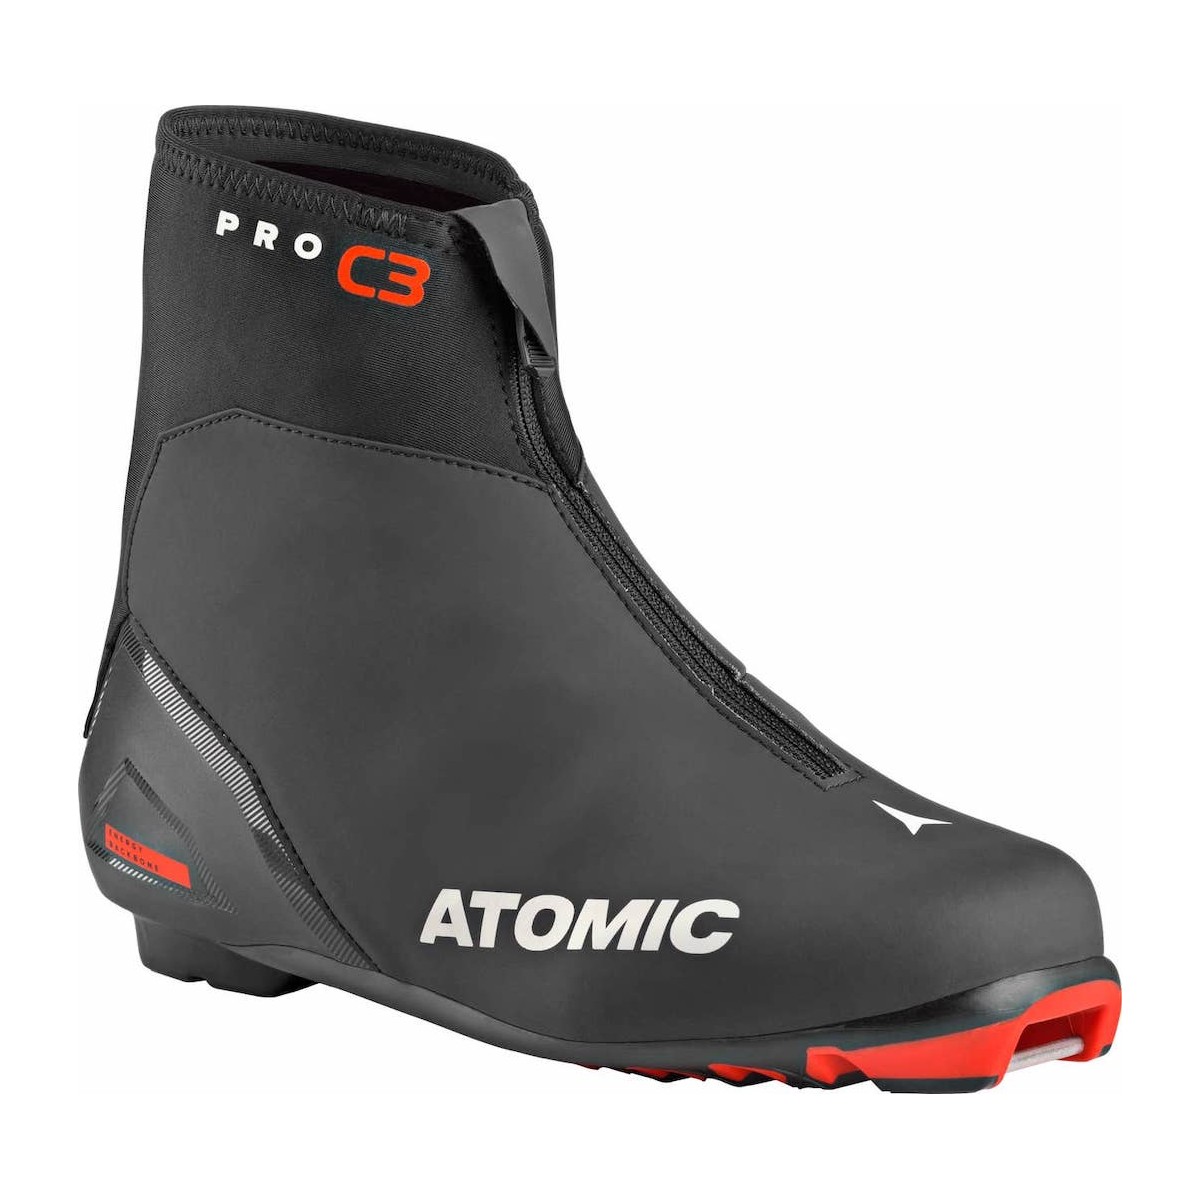 ATOMIC PRO C3 PROLINK classic nordic boots - black/red